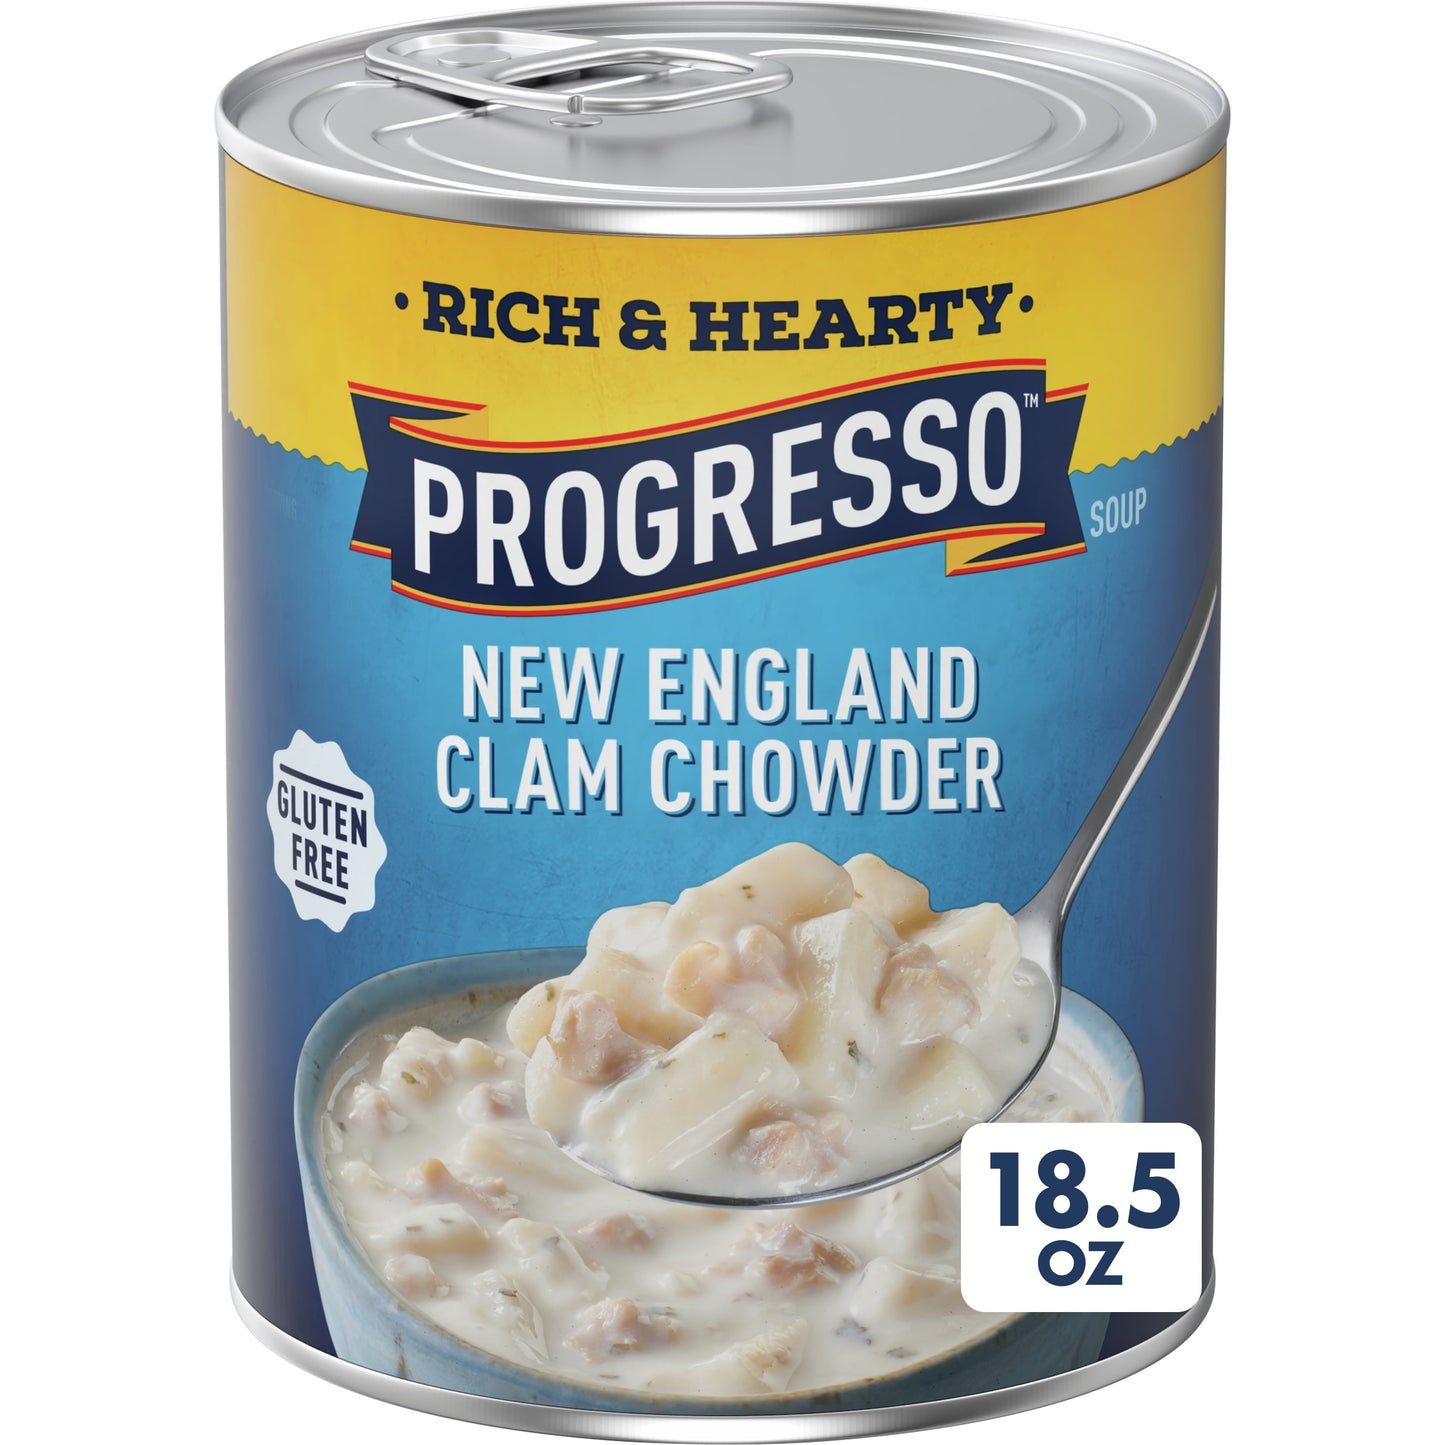 Progresso New England Clam Chowder Soup, Rich & Hearty Canned Soup, Gluten Free, 18.5 oz